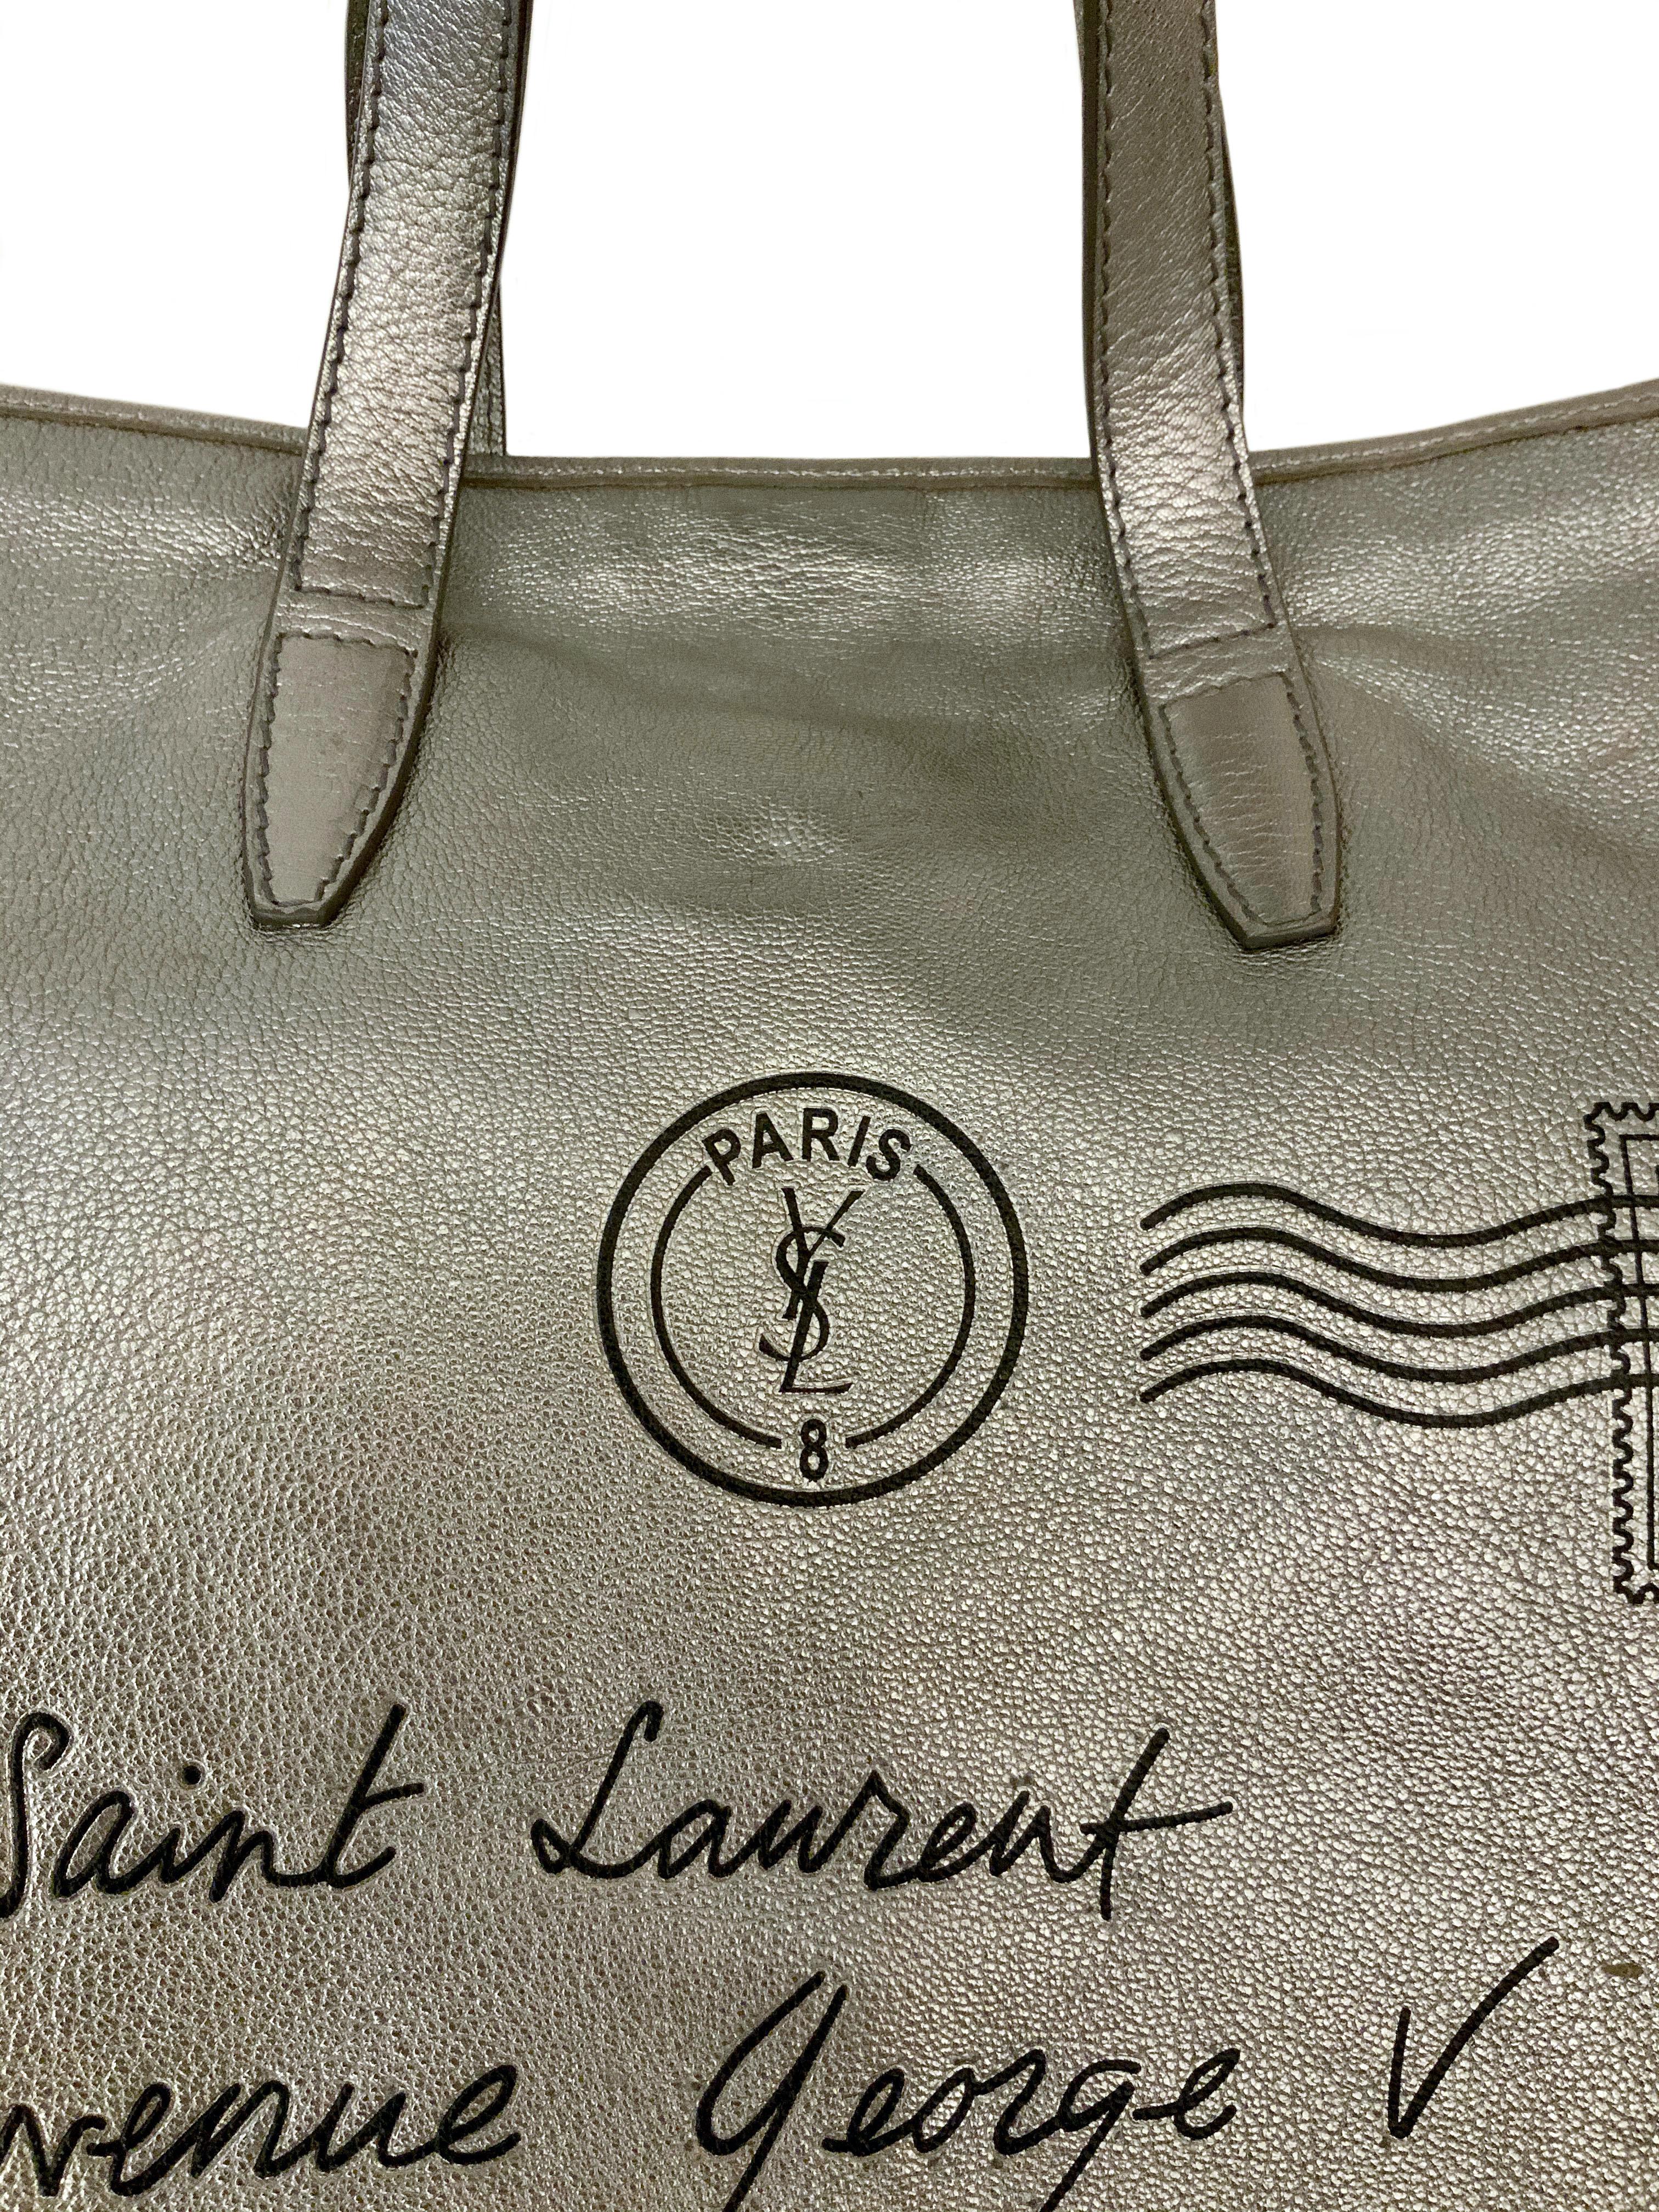 This pre-owned gently used tote bag from the house of Yves Saint Laurent is a fun and easy style to wear. 
Crafted in a soft grainy goatskin leather, it is light when empty allowing some weight and still confortable to carry when full.
The double